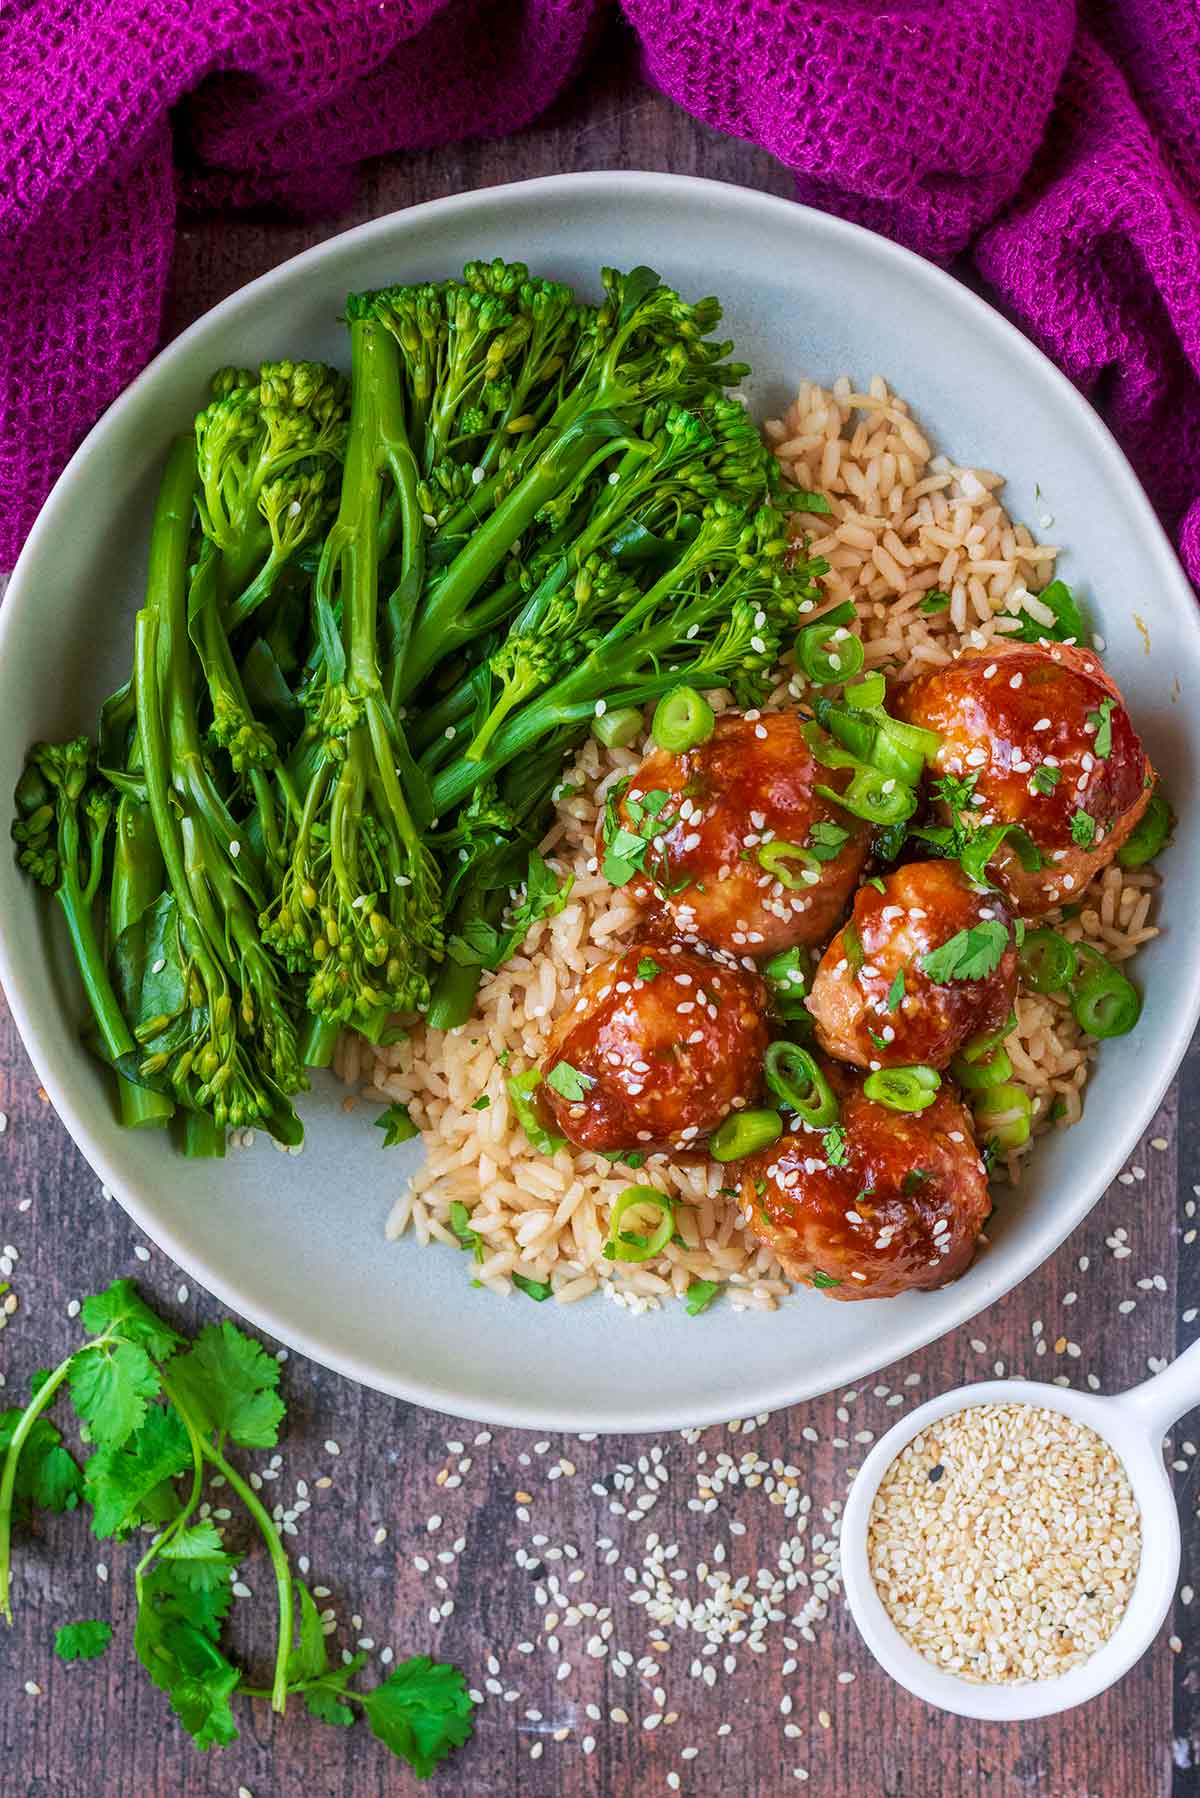 A plate of meatballs in sauce with rice and broccoli.